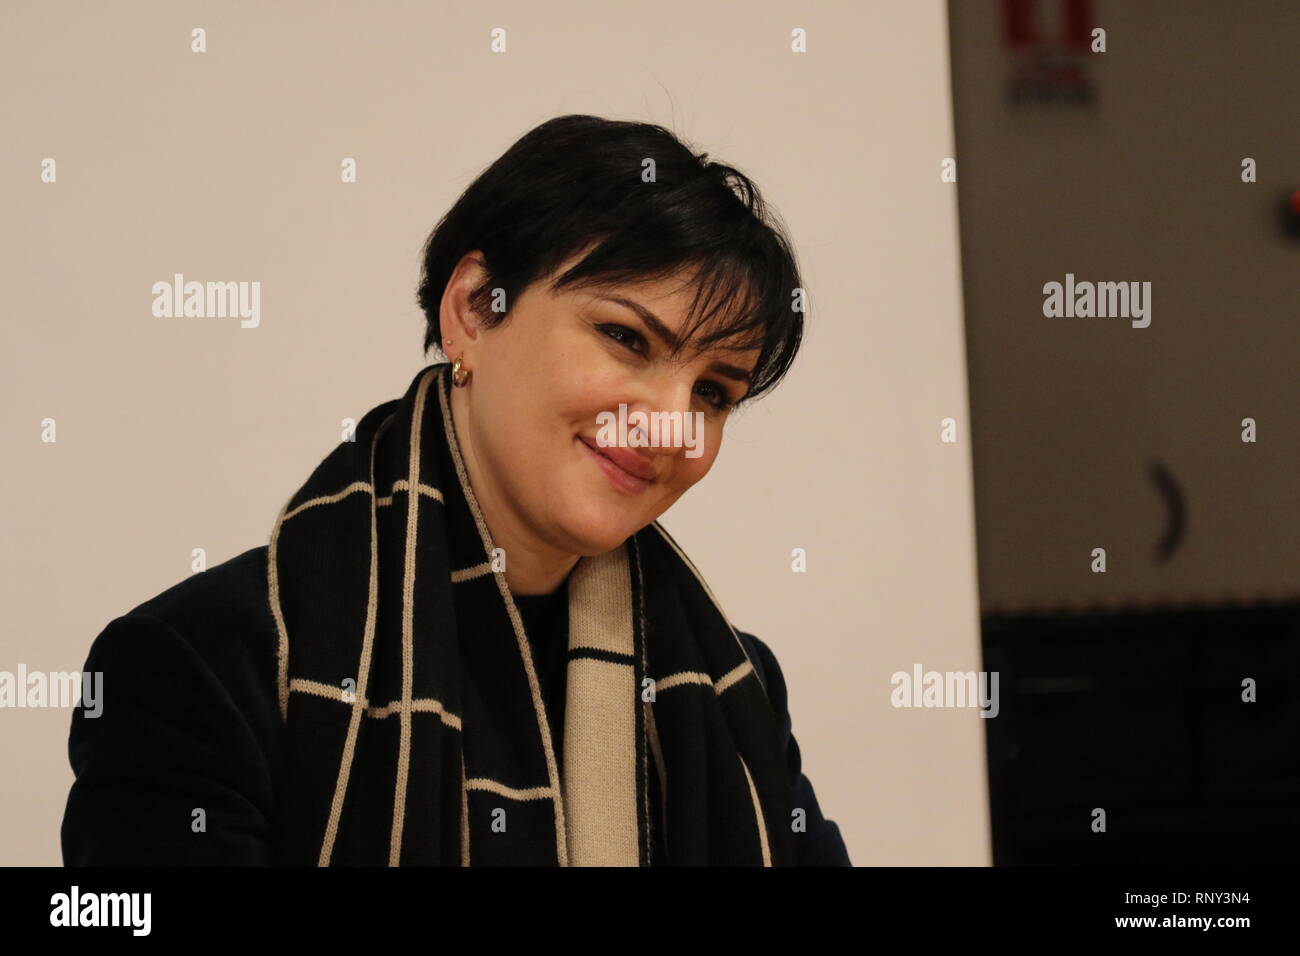 Naples, Italy. 19th Feb, 2019. Arisa, back from the 69th edition of the' Festival di Sanremo', meets fans in Naples, to present her latest album entitled 'Una nuova Rosalba in città'. Credit: Espixel Photo/Pacific Press/Alamy Live News Stock Photo